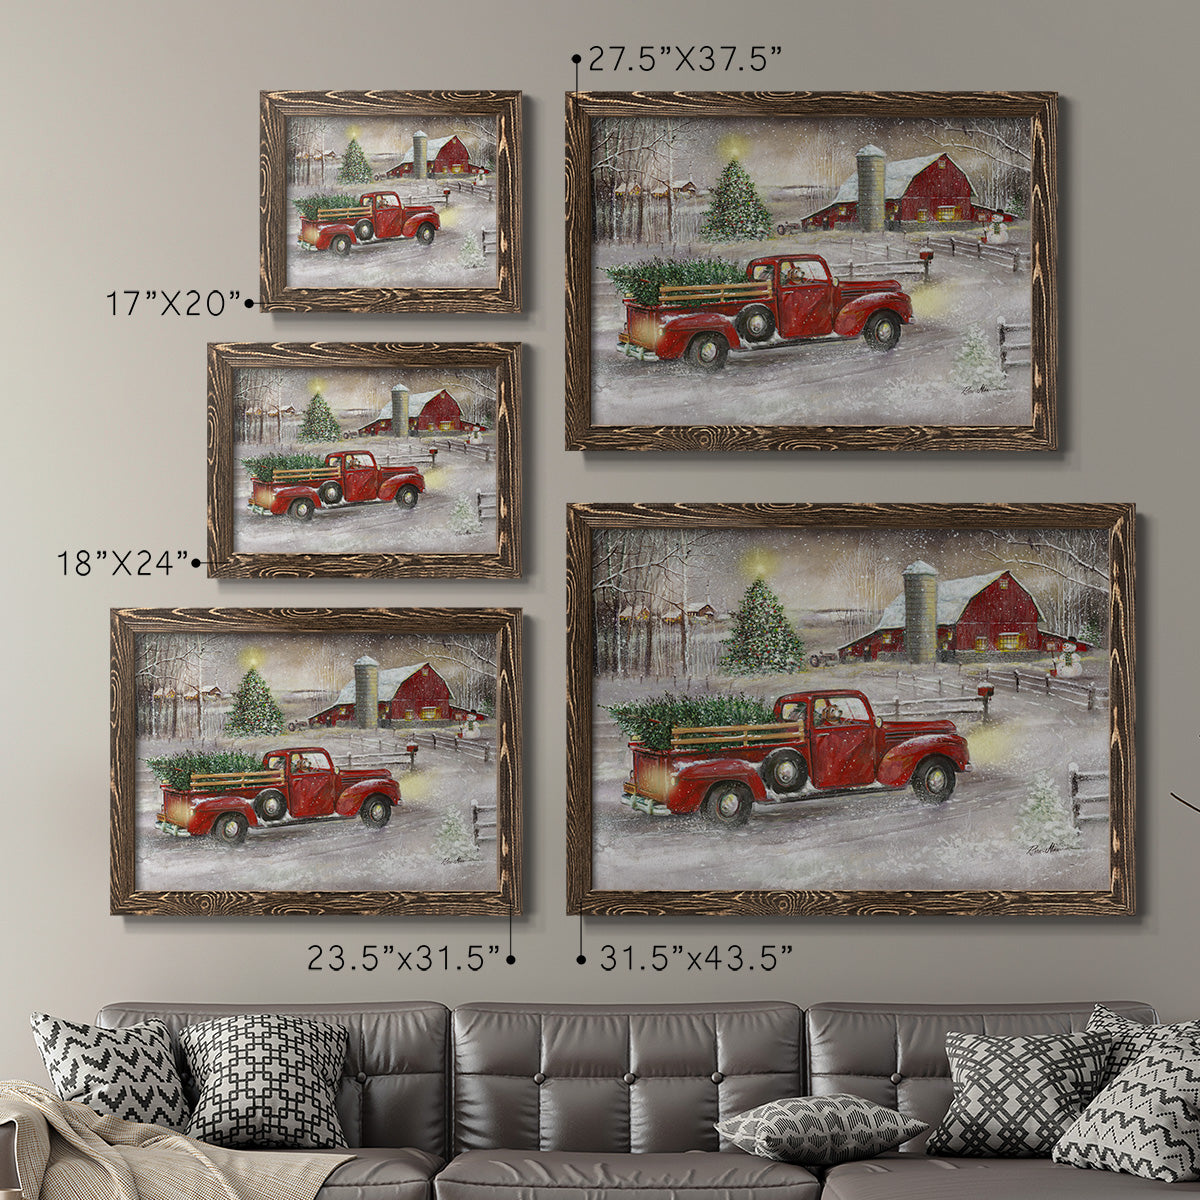 Making Christmas Memories-Premium Framed Canvas - Ready to Hang